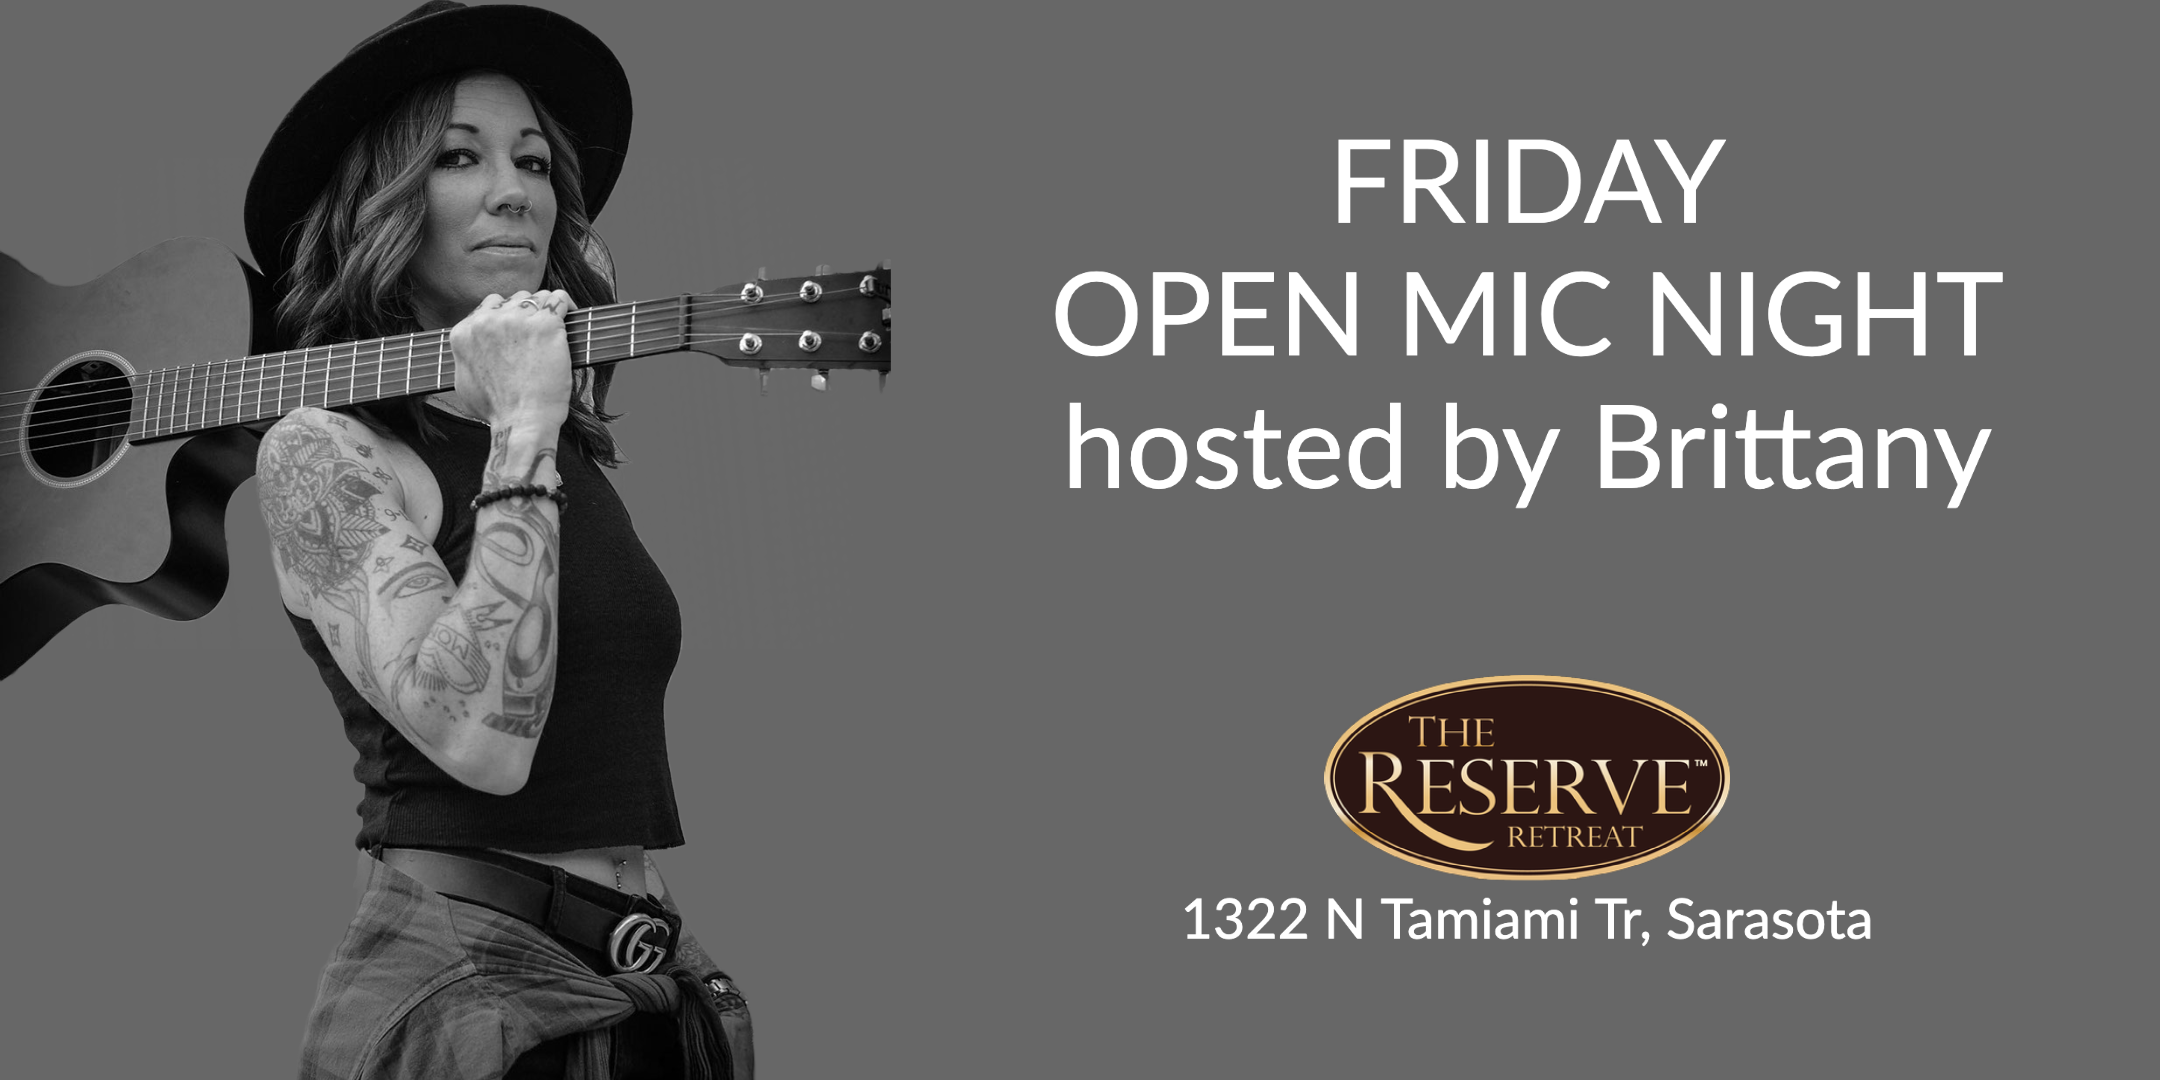 Brittany Loeffler hosts Friday Open Mic Night at The Reserve Retreat